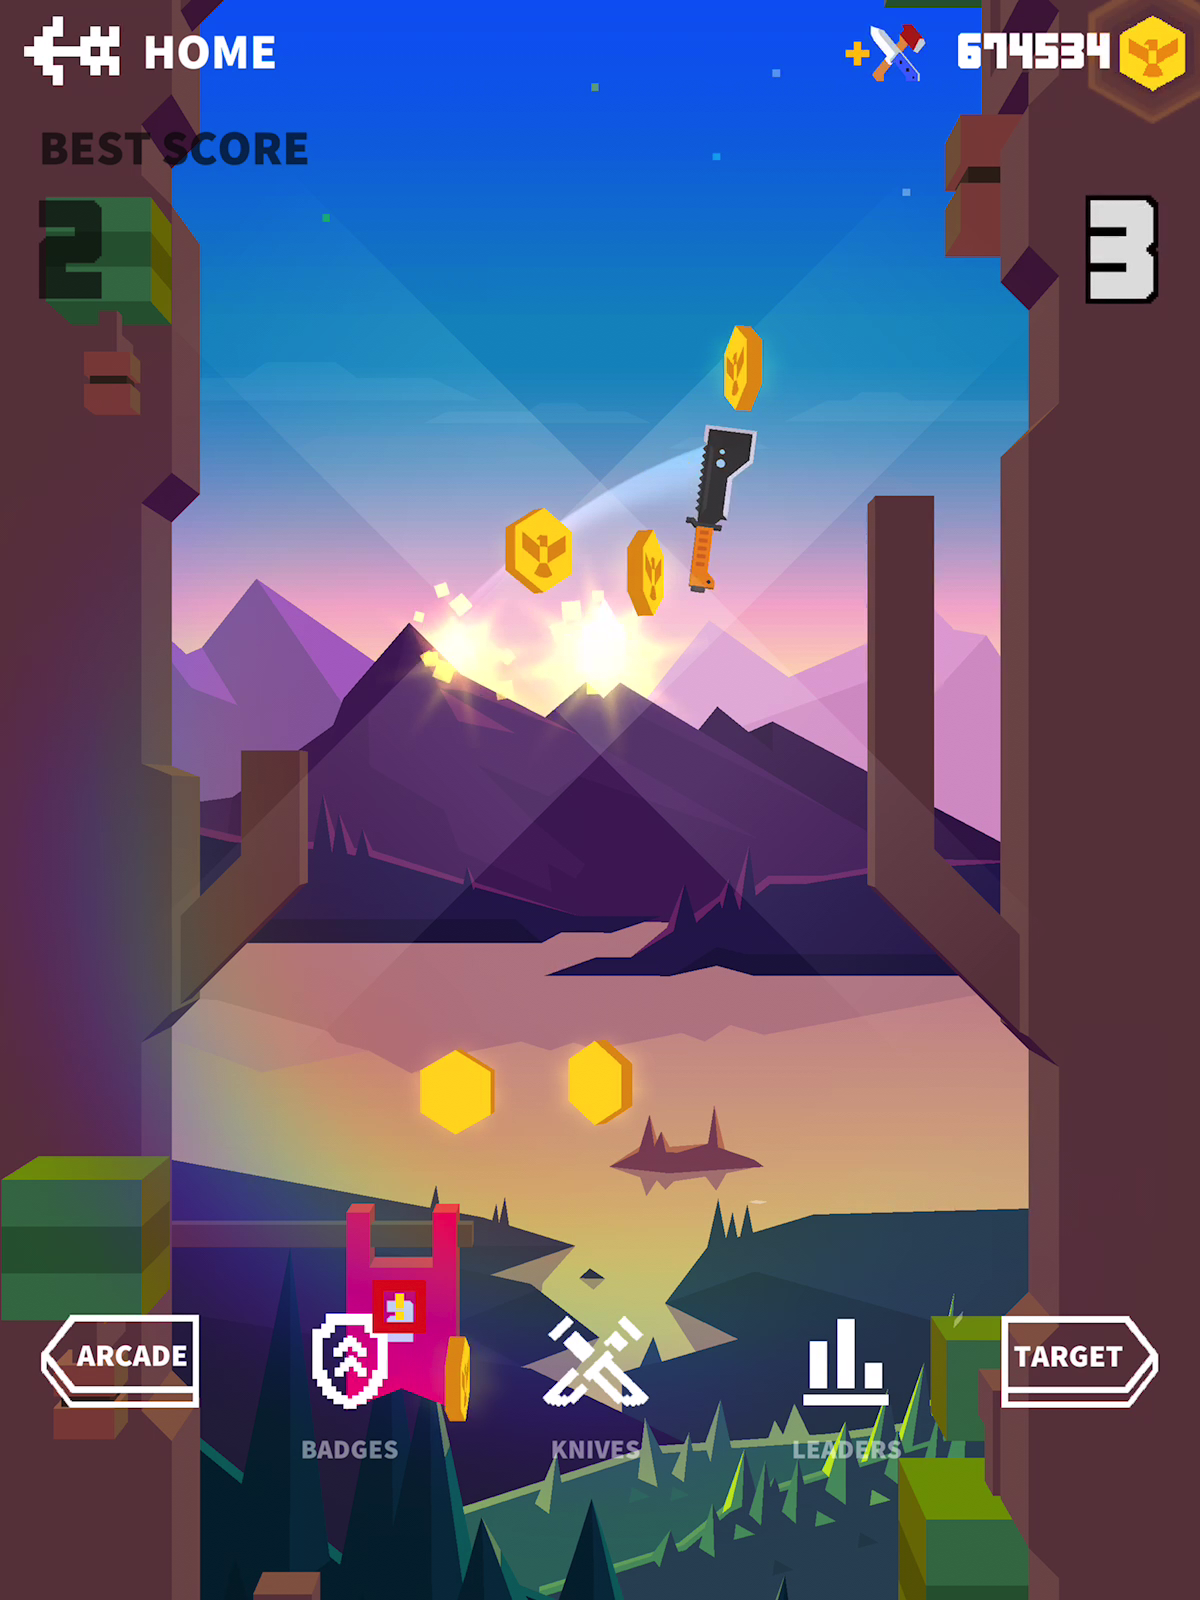 Play Flippy Knife – Throwing master Online